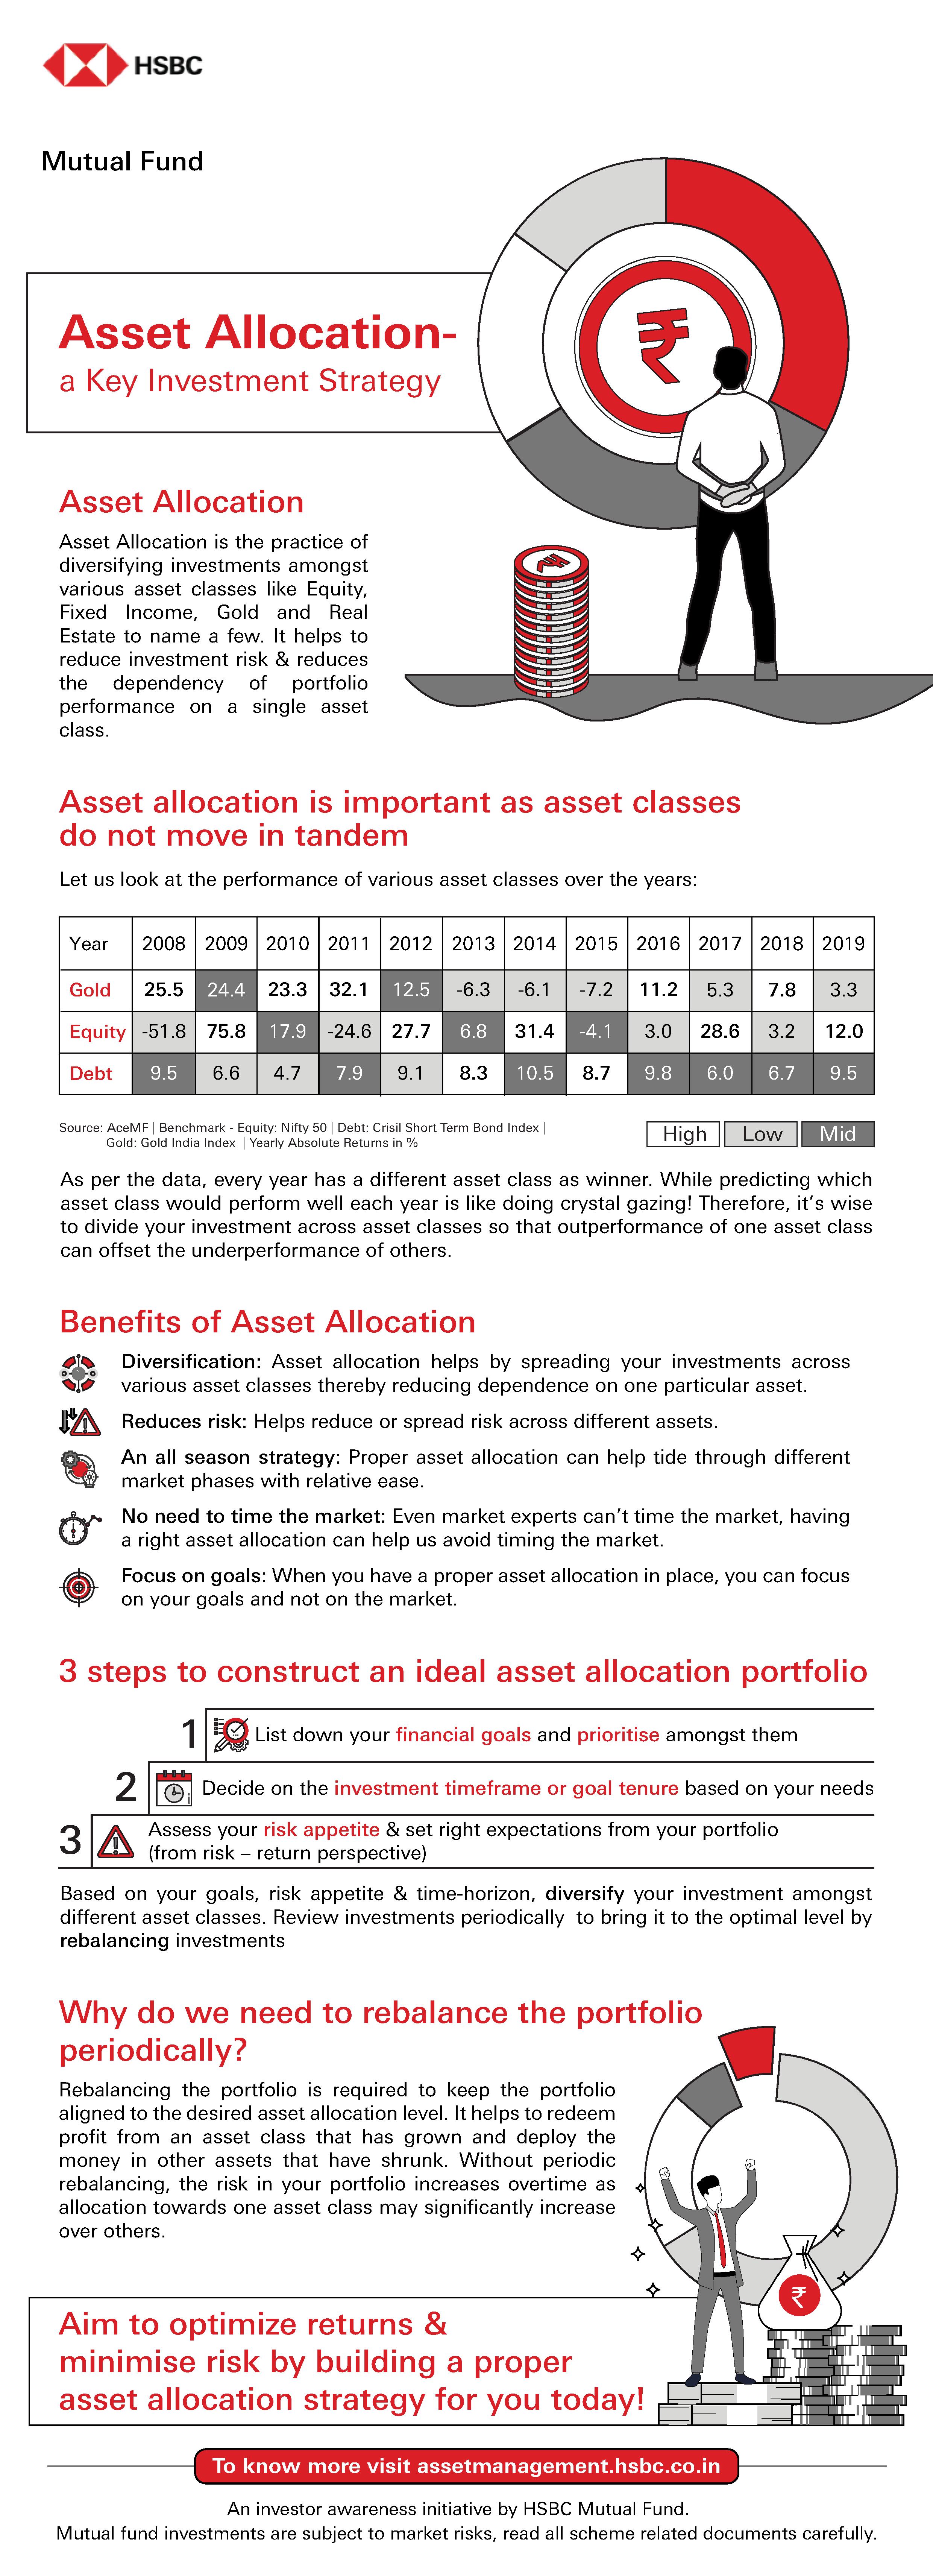 Download Asset Allocation - A Key Investment Strategy (162KB, PDF)